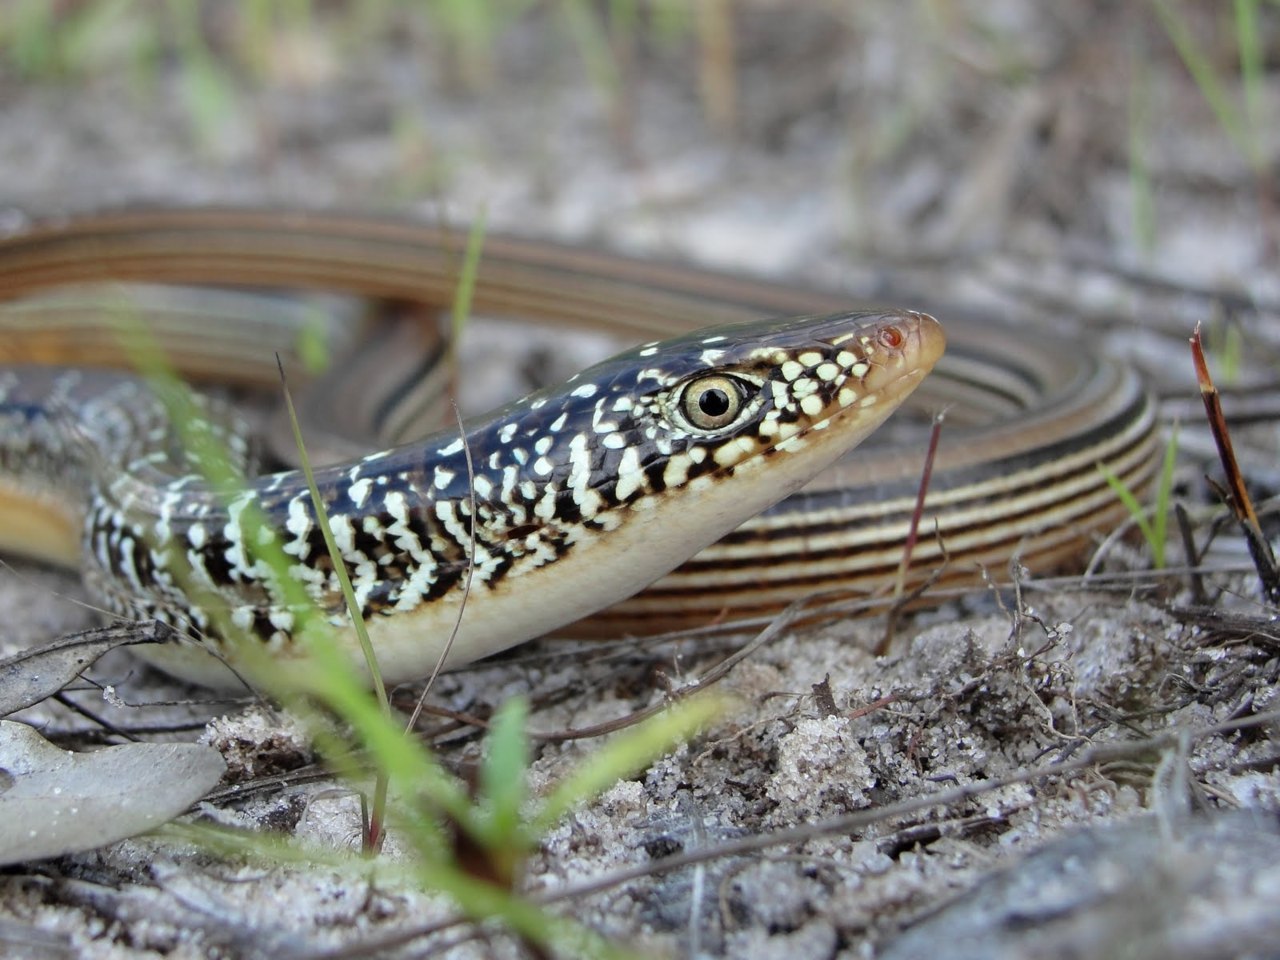 Reptile Facts - The Eastern Glass Lizard (Ophisaurus ...